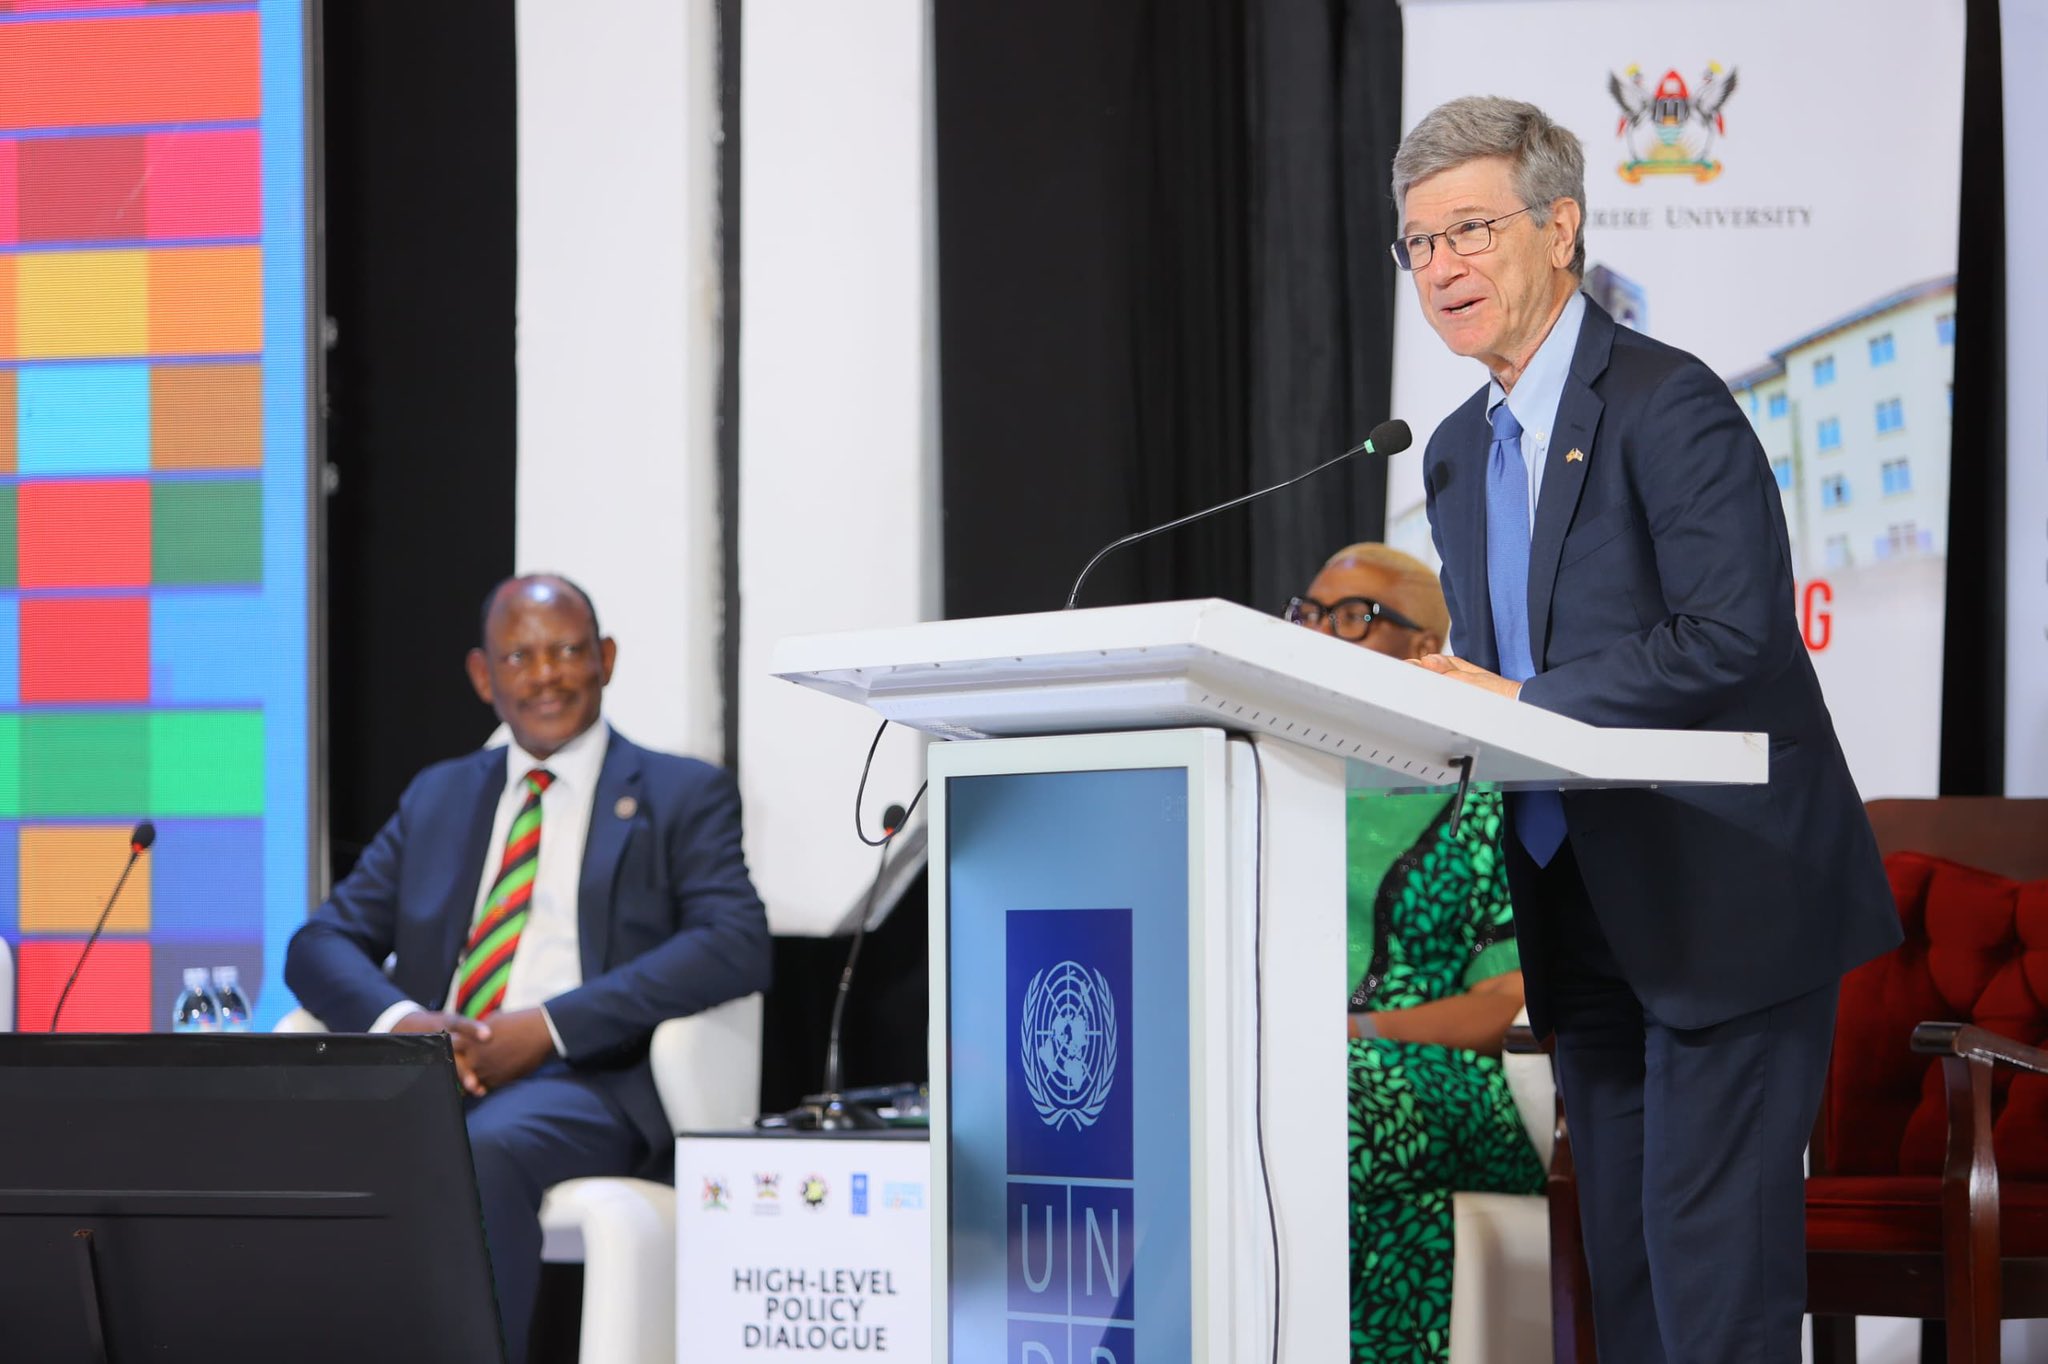 Prof. Jeffrey Sachs (Right) delivers his keynote address at the High-Level Policy Dialogue as Vice Chancellor-Prof. Barnabas Nawangwe (Left) listens on 28th February 2024. High-Level Policy Dialogue organized by the United Nations Development Programme (UNDP), in partnership with the Office of the Prime Minister (OPM), National Planning Authority and Makerere University on the theme “Accelerating the Sustainable Development Goals through leveraging Innovating Financing, the Parish Development Model, and Science and Technology”, Keynote address by Prof. Jeffrey Sachs, 28th February 2024, Yusuf Lule Central Teaching Facility Auditorium, Makerere University, Kampala Uganda, East Africa.